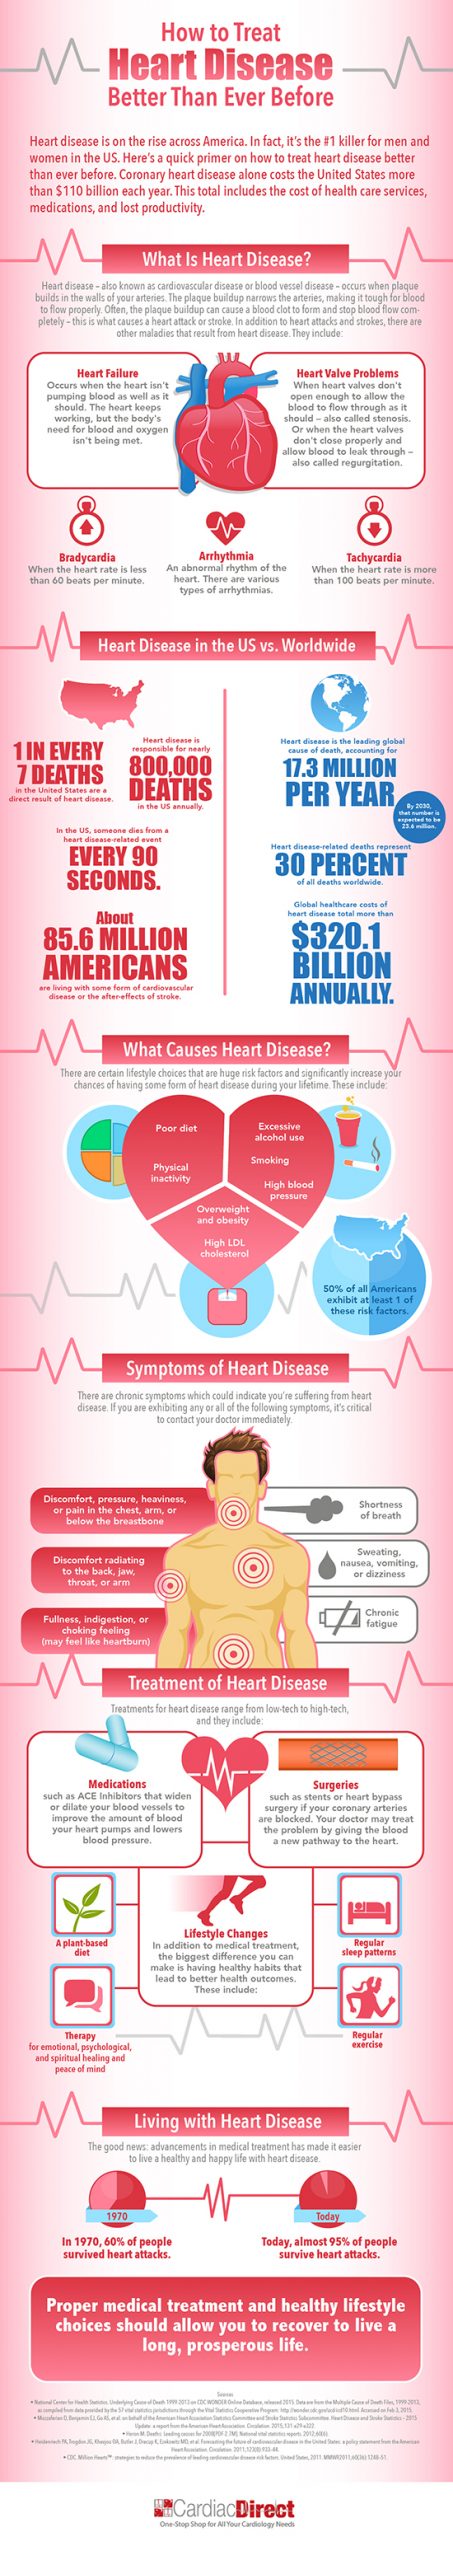 Heart Disease Treatment: Better than Ever - CardiacDirect